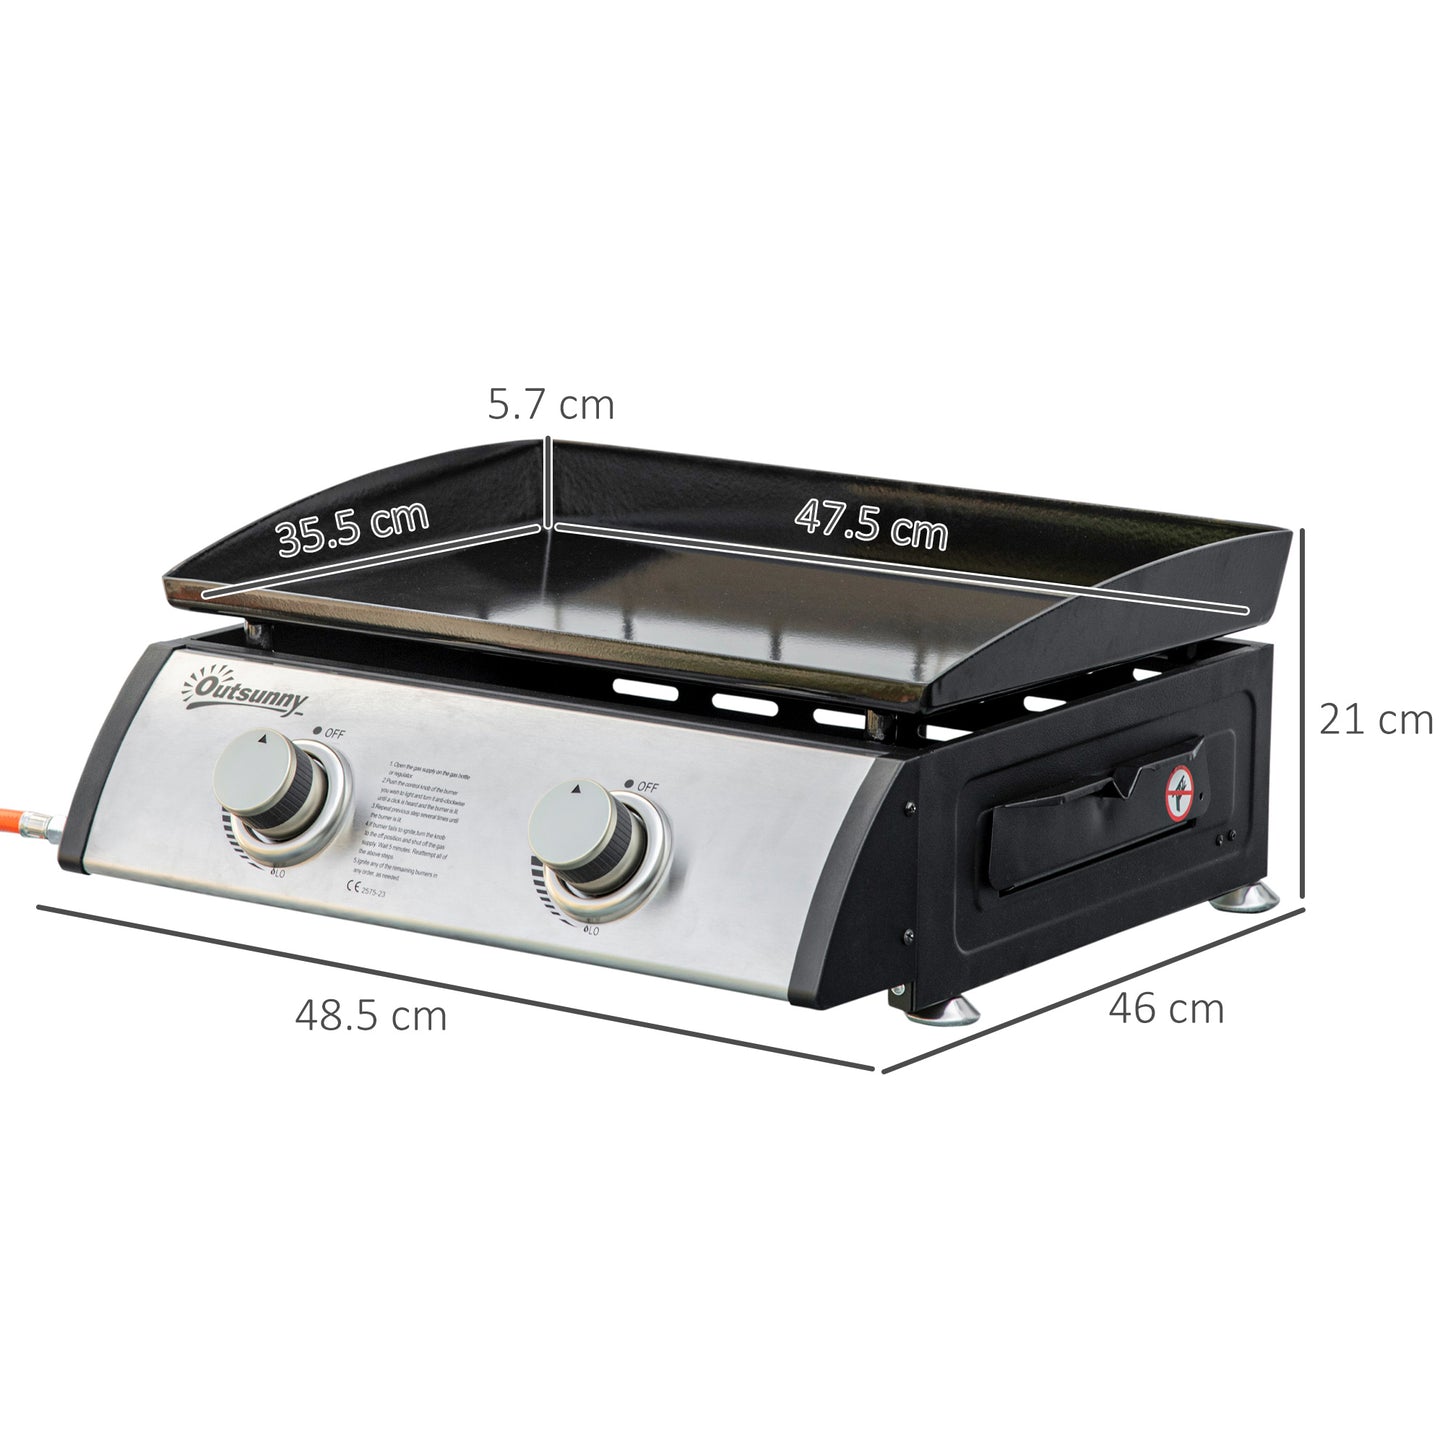 Outsunny Gas Plancha Grill with 2 Stainless Steel Burner, 6kW, Portable Tabletop Gas BBQ with Non-Stick Griddle for Camping Picnic Garden Party Festival